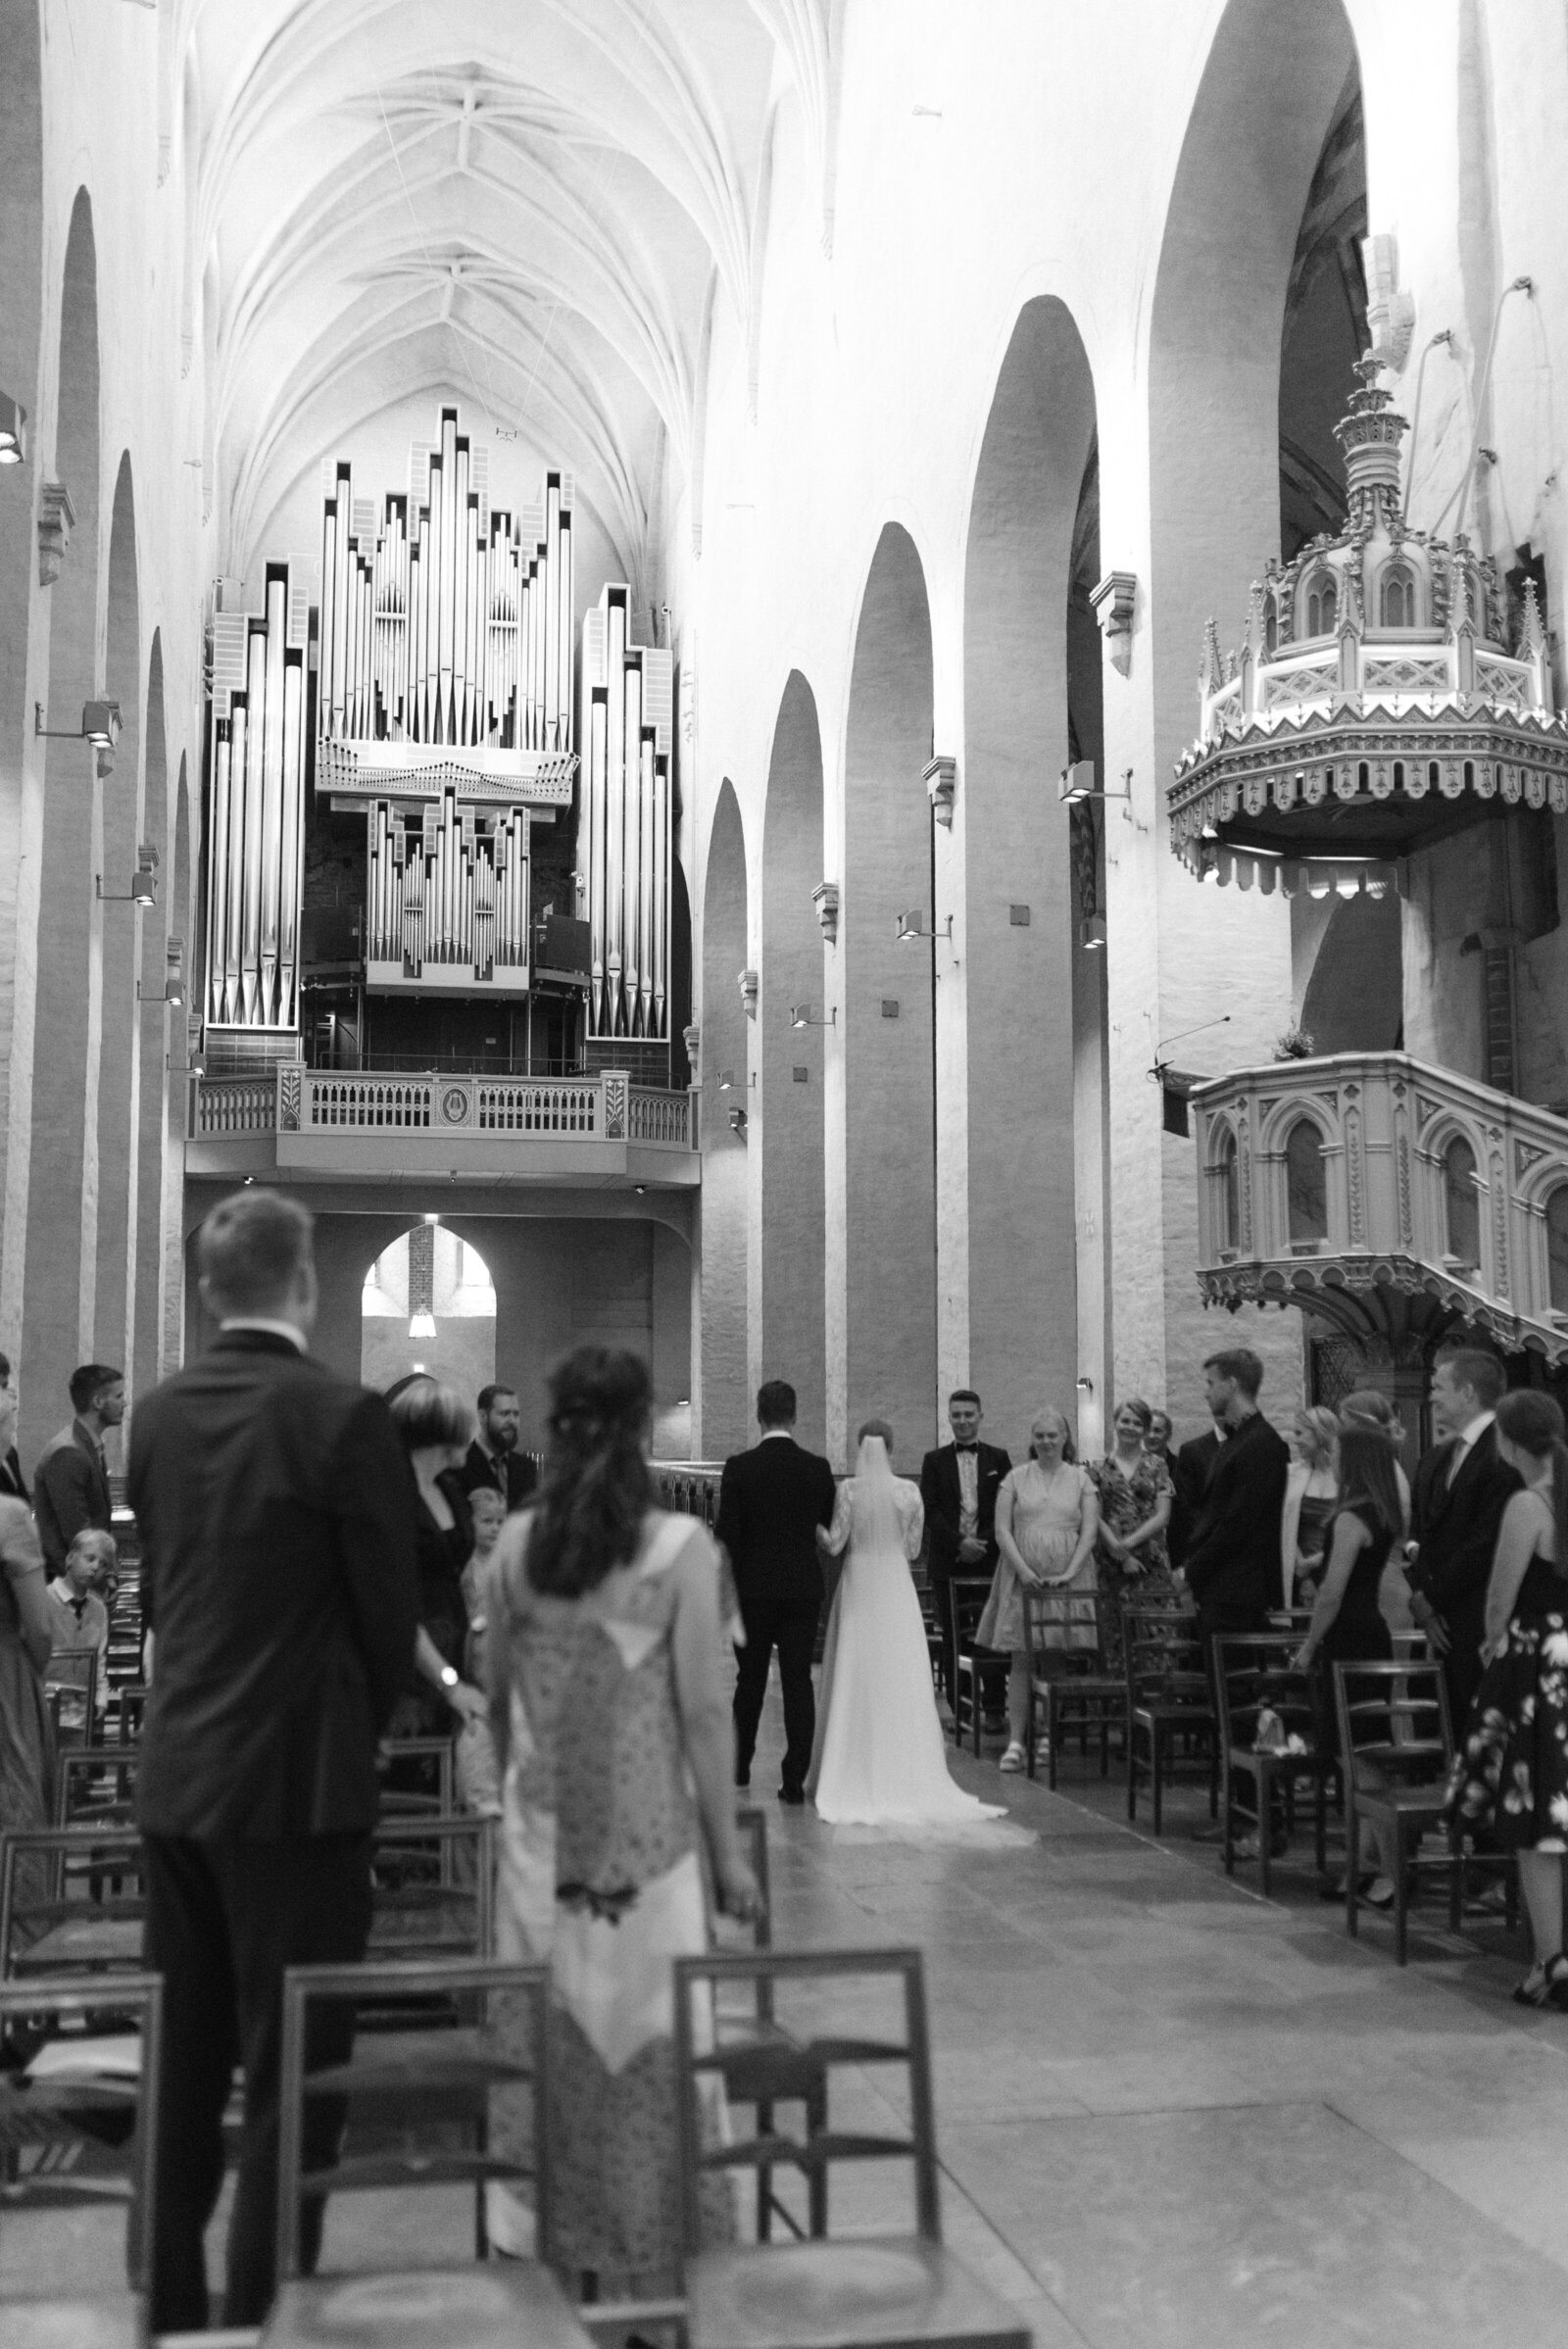 Image of wedding couple walking down the aisle  in Turku cathedral during wedding ceremony captured by wedding photographer Hannika Gabriesson.